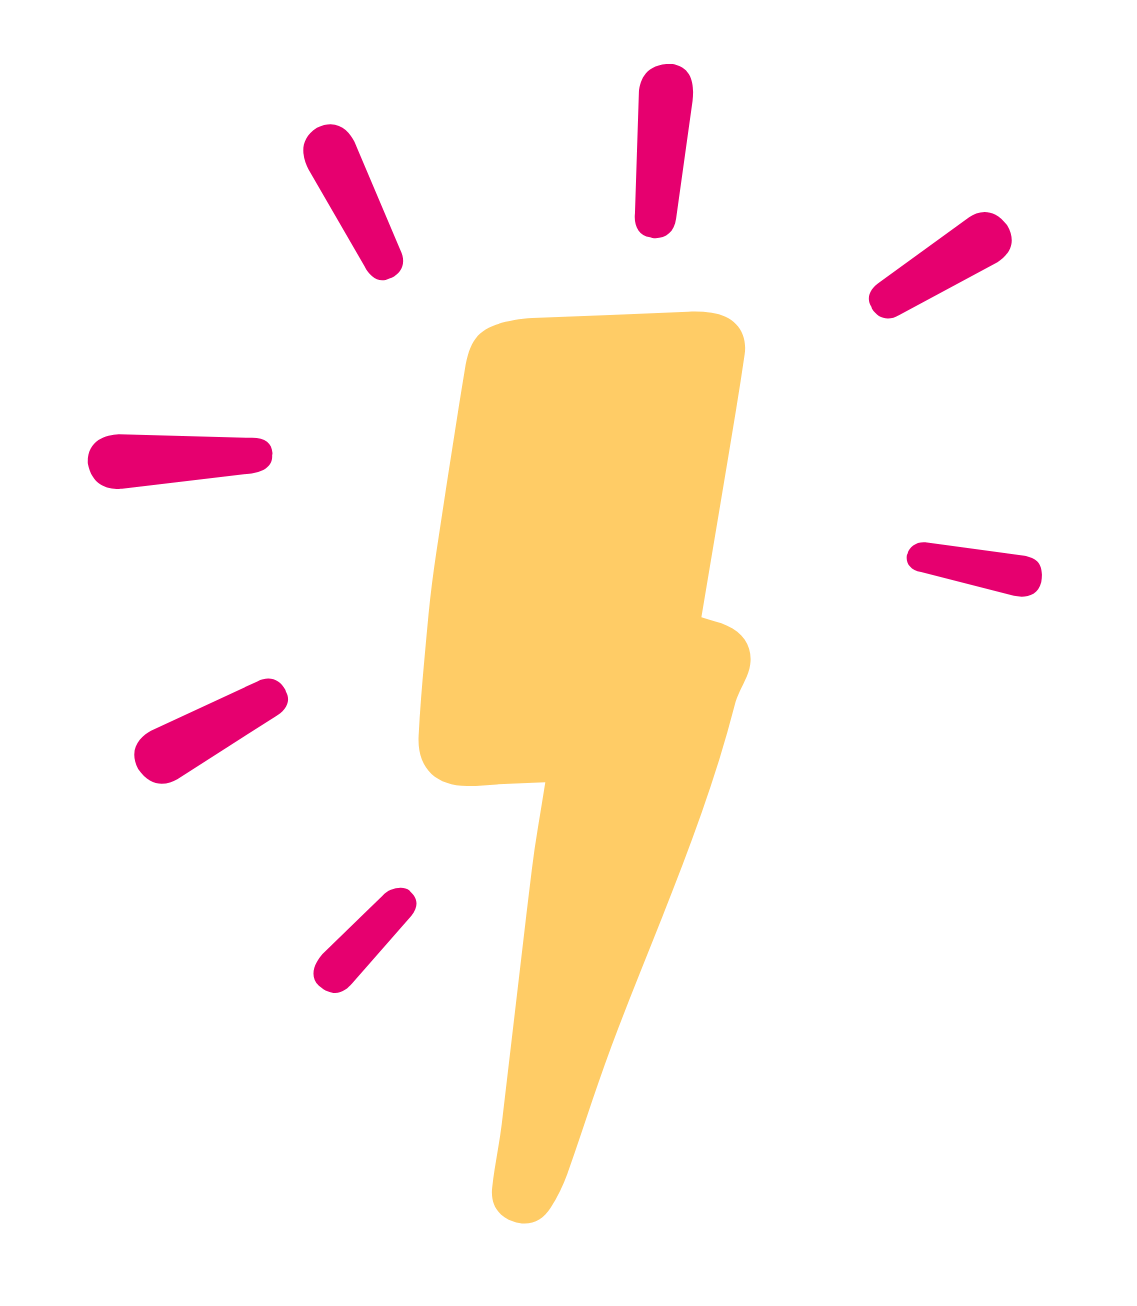 Lightning bolt with exclamation lines